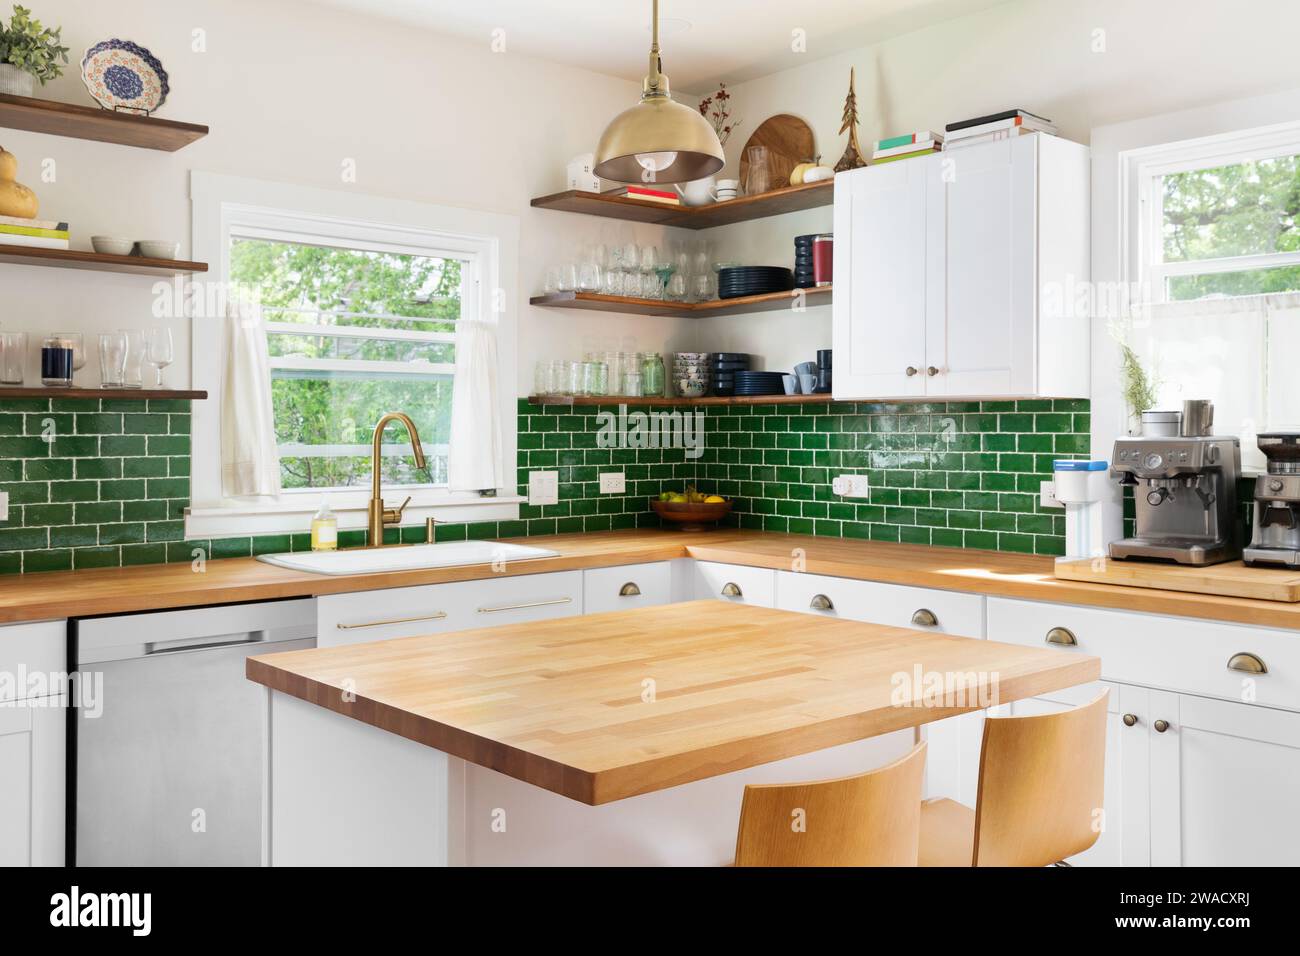 A kitchen detail with butcher block wood countertops, white cabinets, a gold fixture hanging over the island, and green subway tile backsplash. Stock Photo